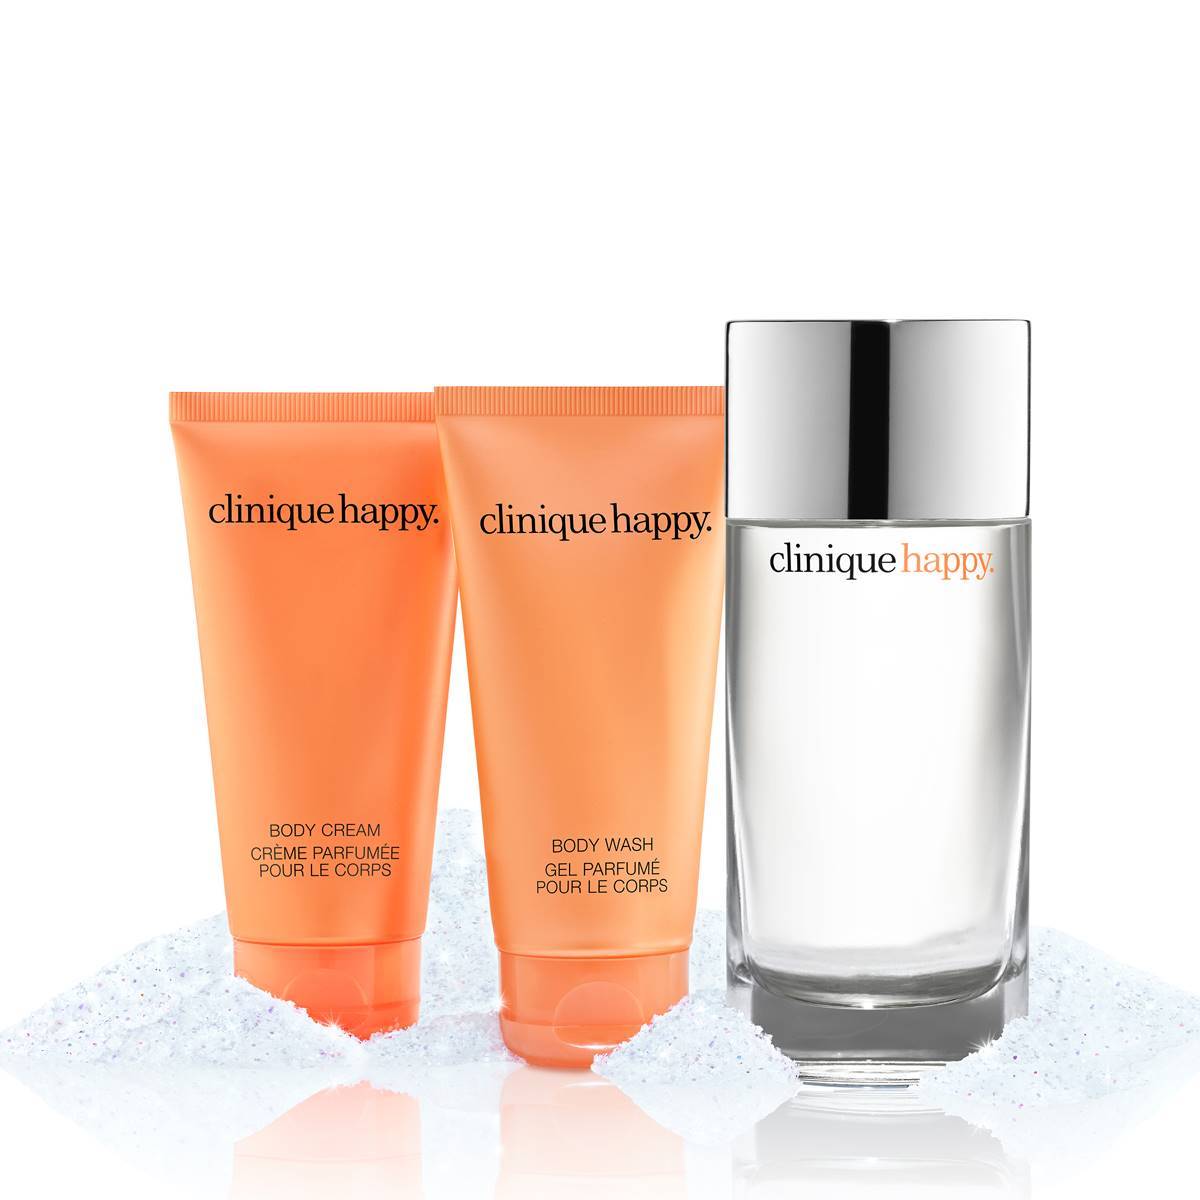 Clinique Absolutely Happy(tm) Fragrance Set